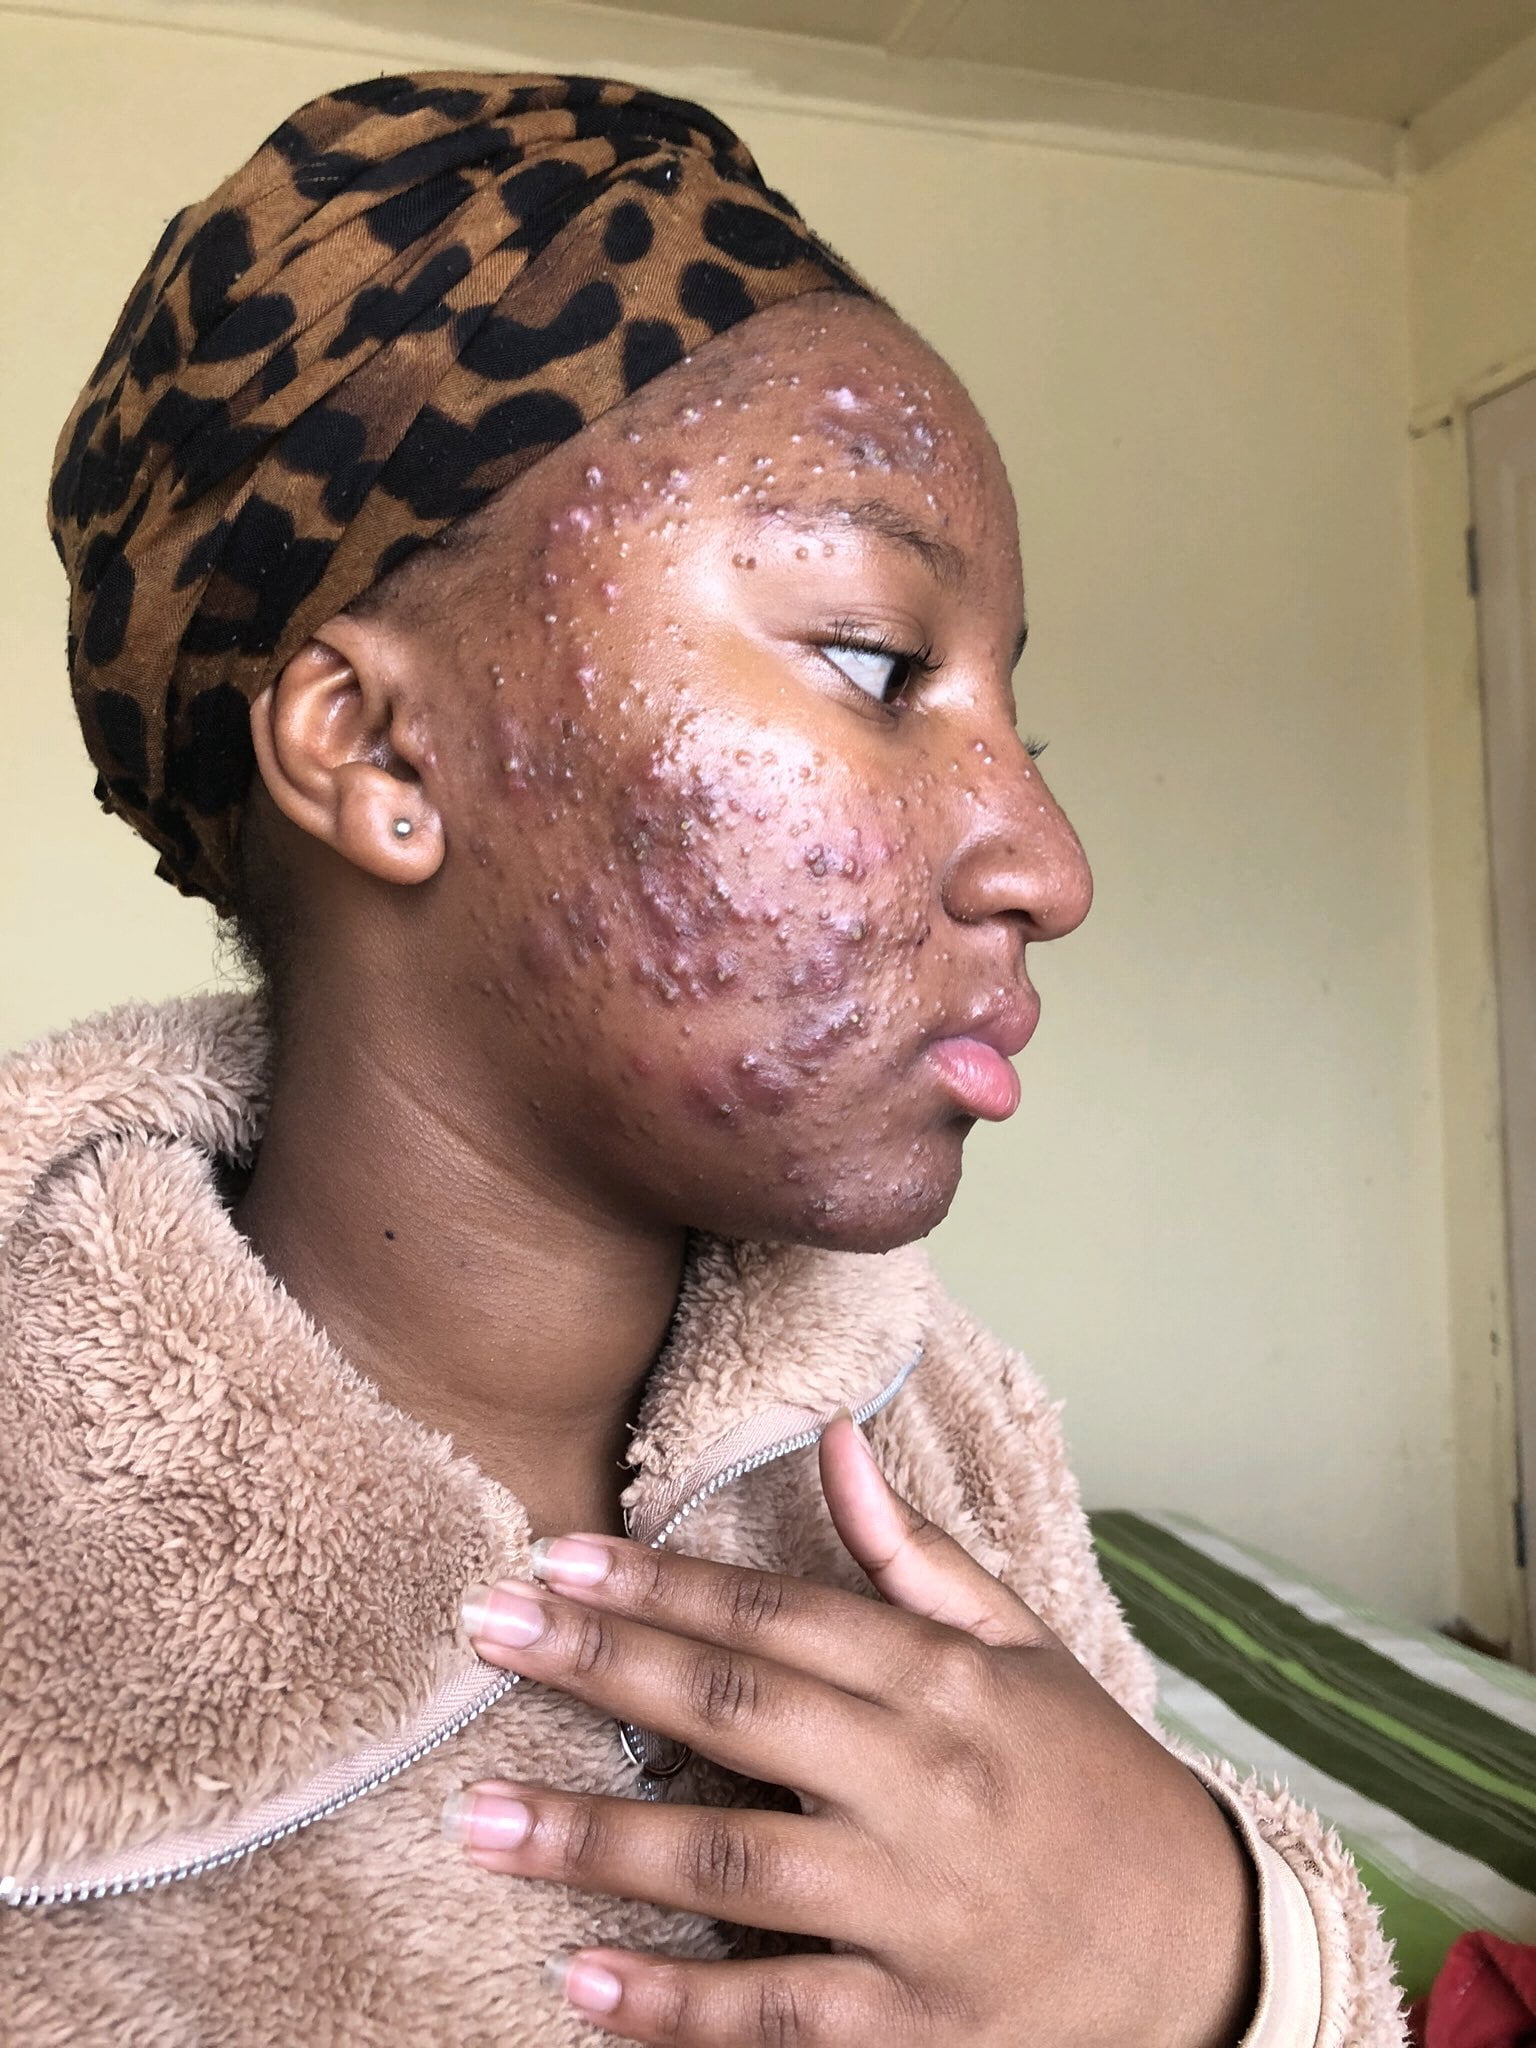 See how it started and how it ended for a girl with severe acne